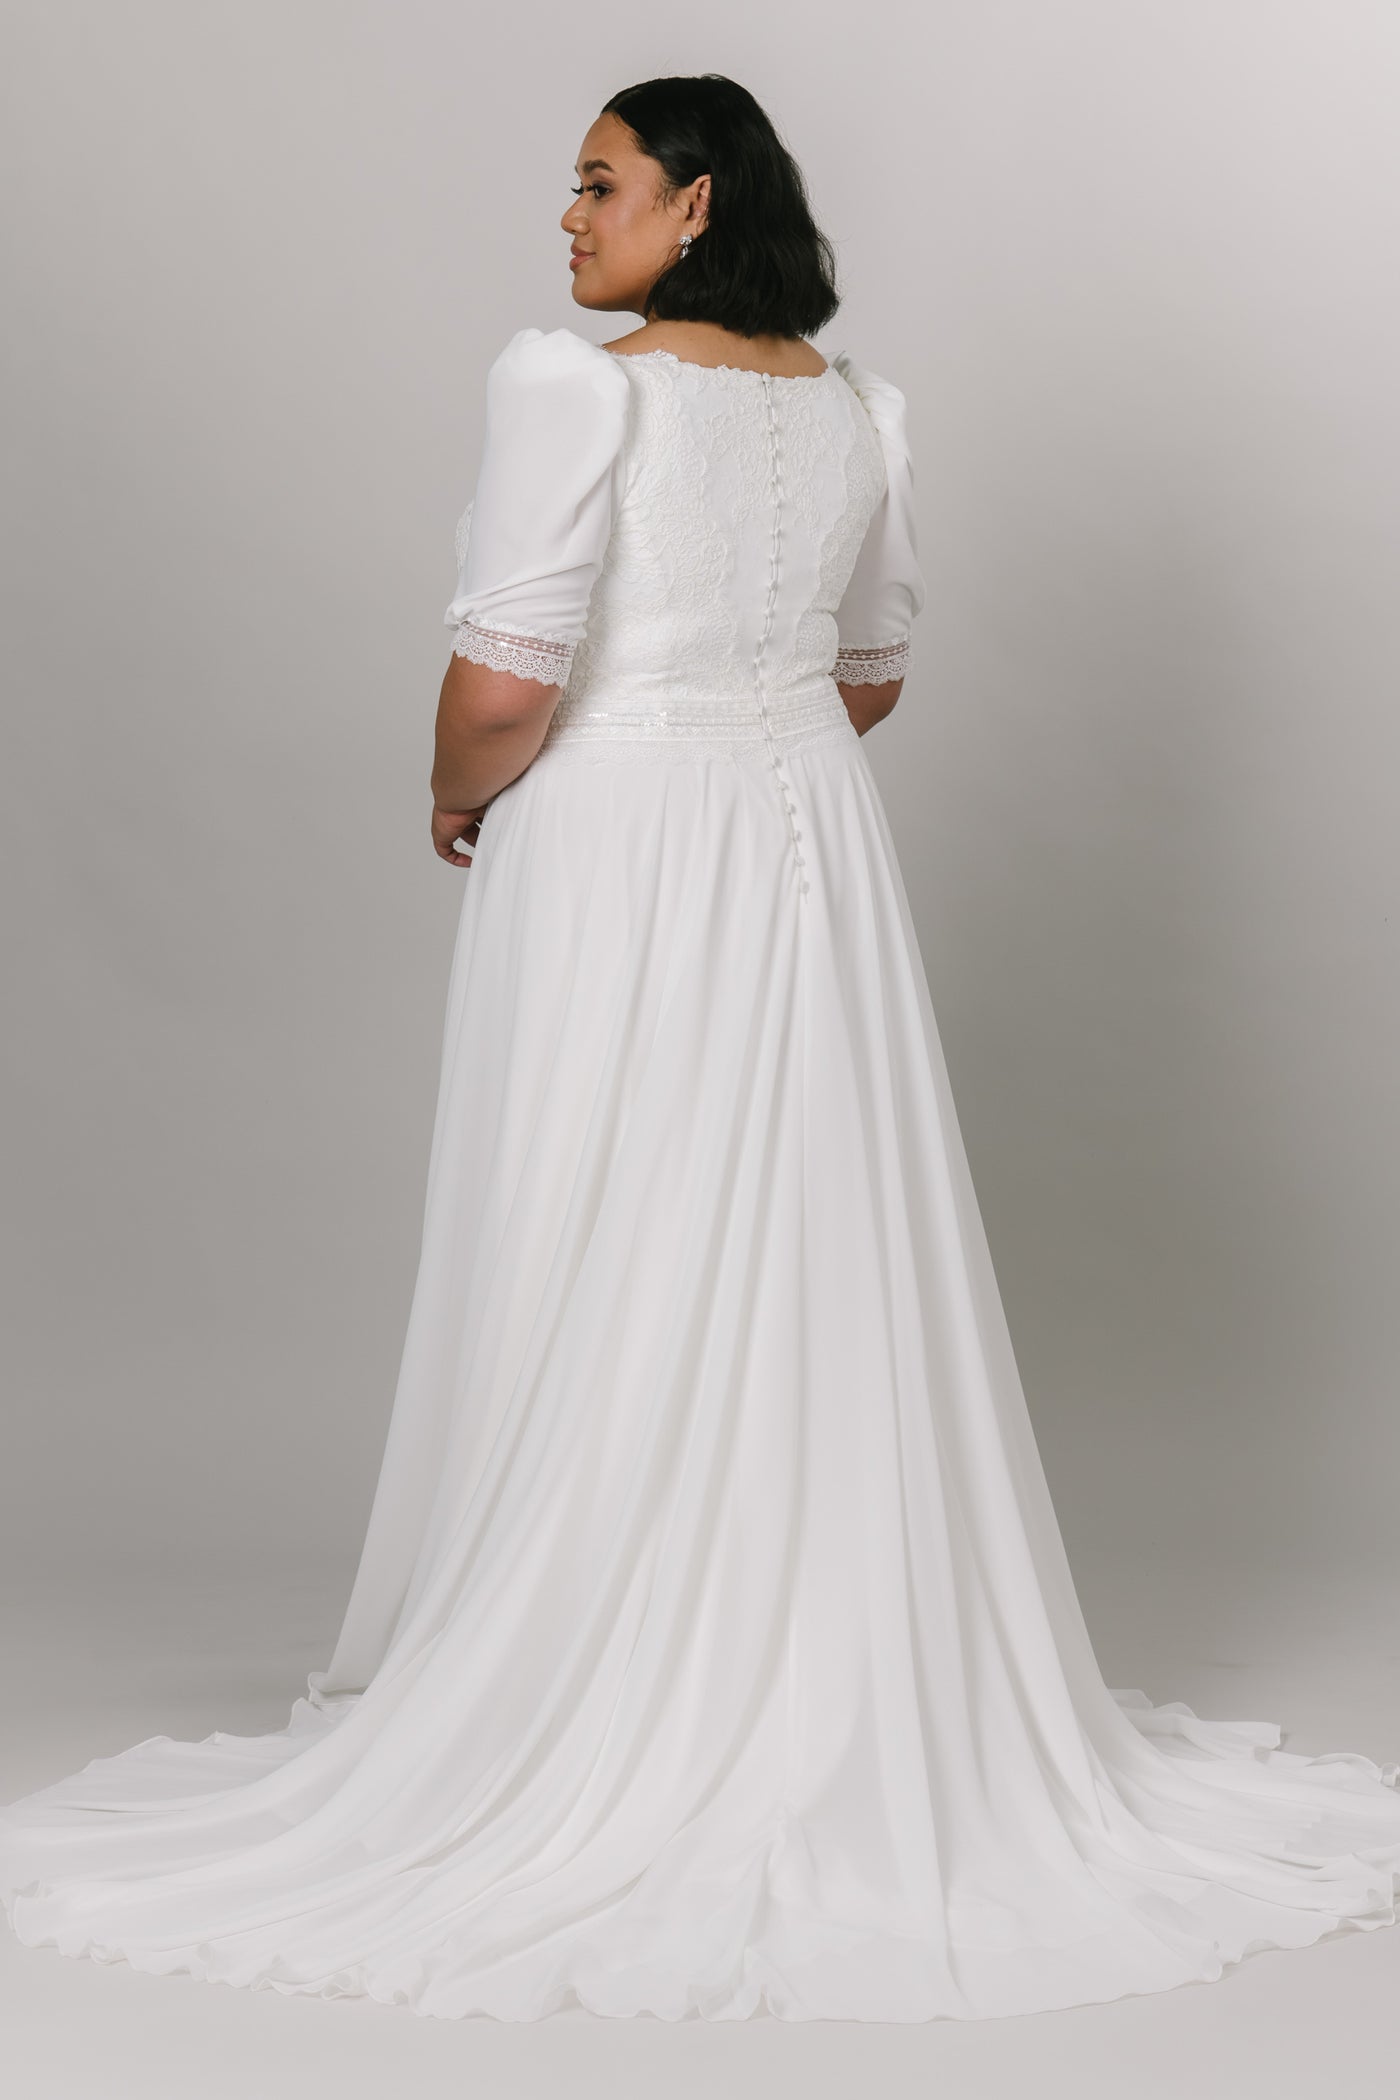 Plus size of modest wedding dress with a-line silhouette and v-neckline. The bottom is made with chiffon fabric and the top is has delicate lace with puffed sleeves.